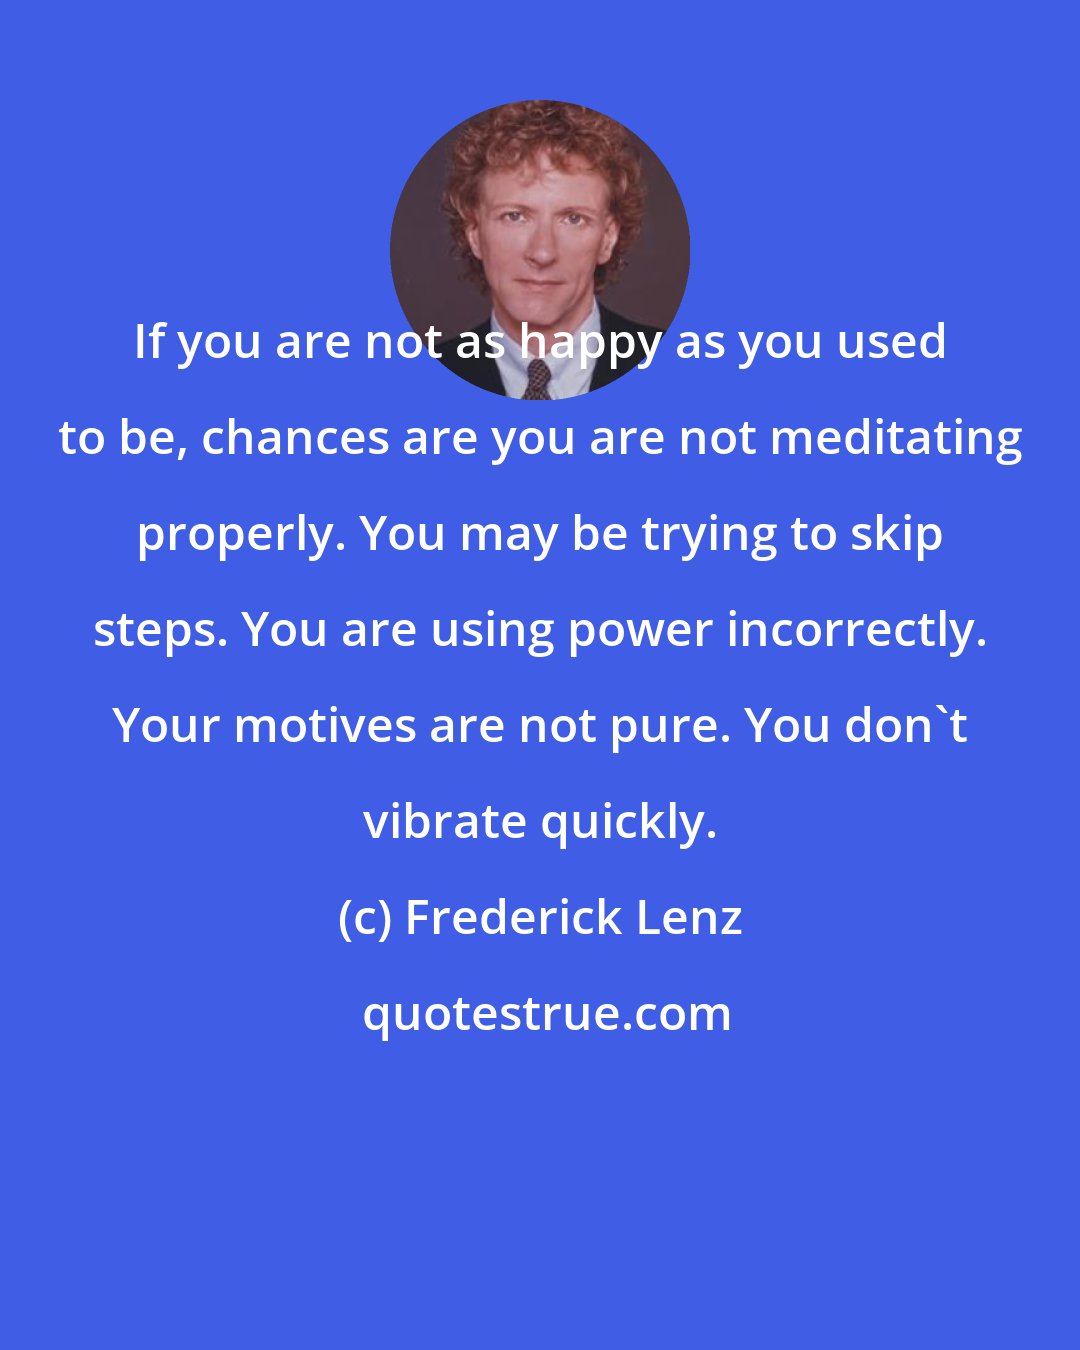 Frederick Lenz: If you are not as happy as you used to be, chances are you are not meditating properly. You may be trying to skip steps. You are using power incorrectly. Your motives are not pure. You don't vibrate quickly.